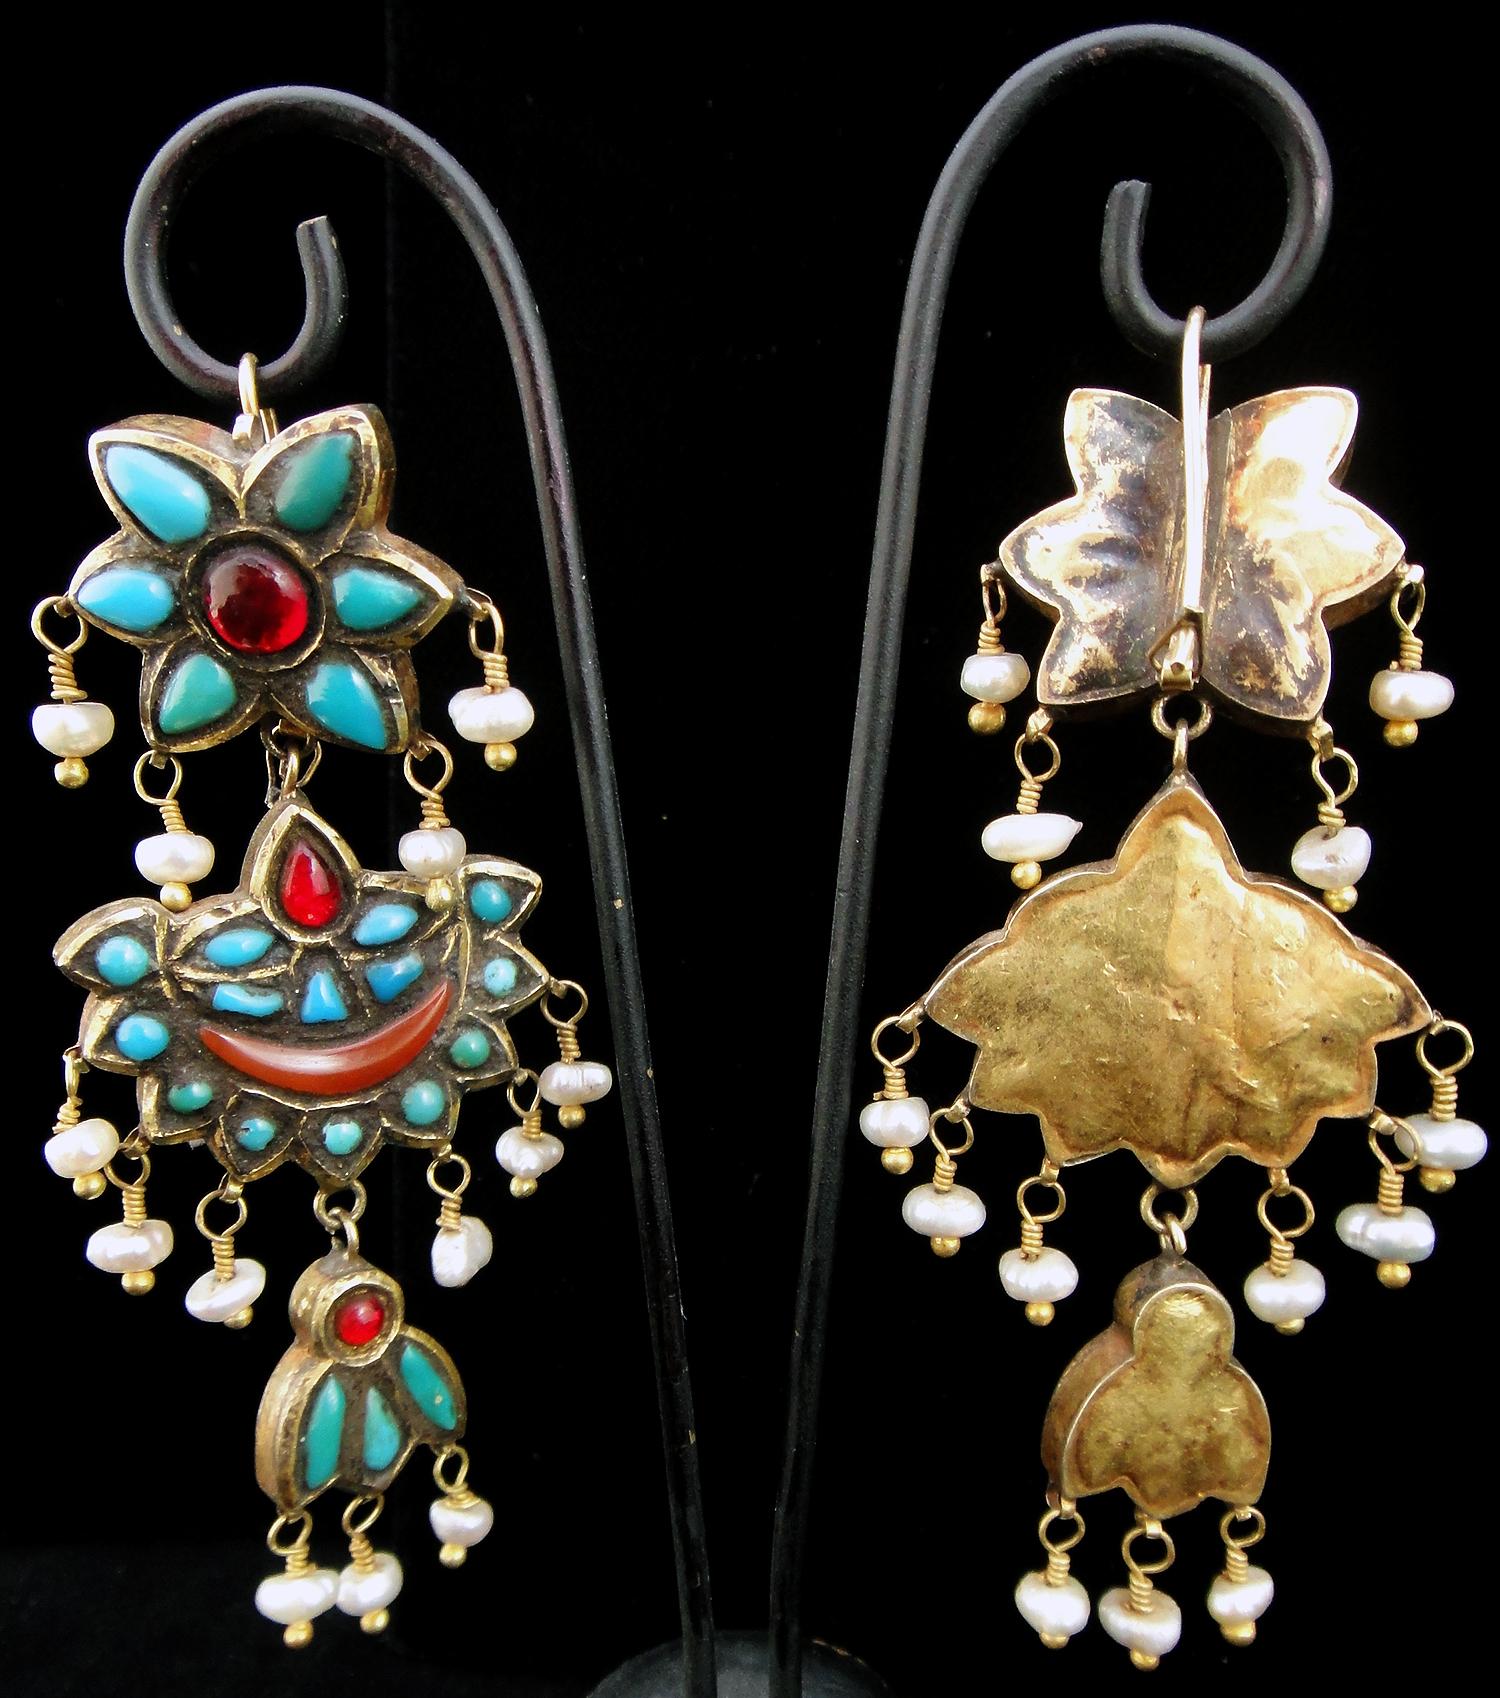 These lovely antique earrings are from Afghanistan. Made of hollow from gilt silver segments, they are adorned with turqoise, glass, carnelian and pearls. Gilt silver, sometimes known in American English by the French term vermeil, is silver which